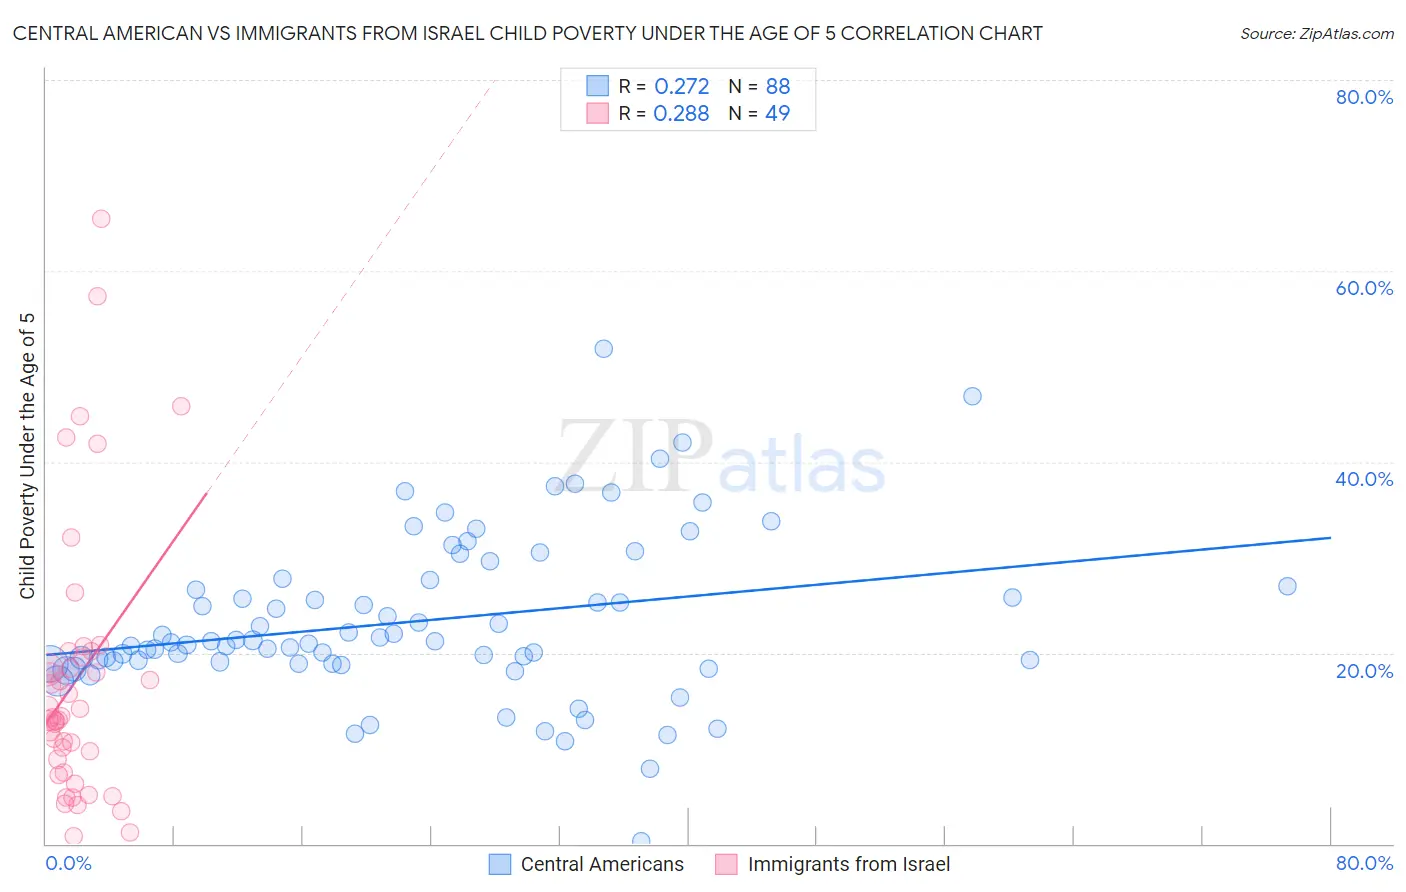 Central American vs Immigrants from Israel Child Poverty Under the Age of 5